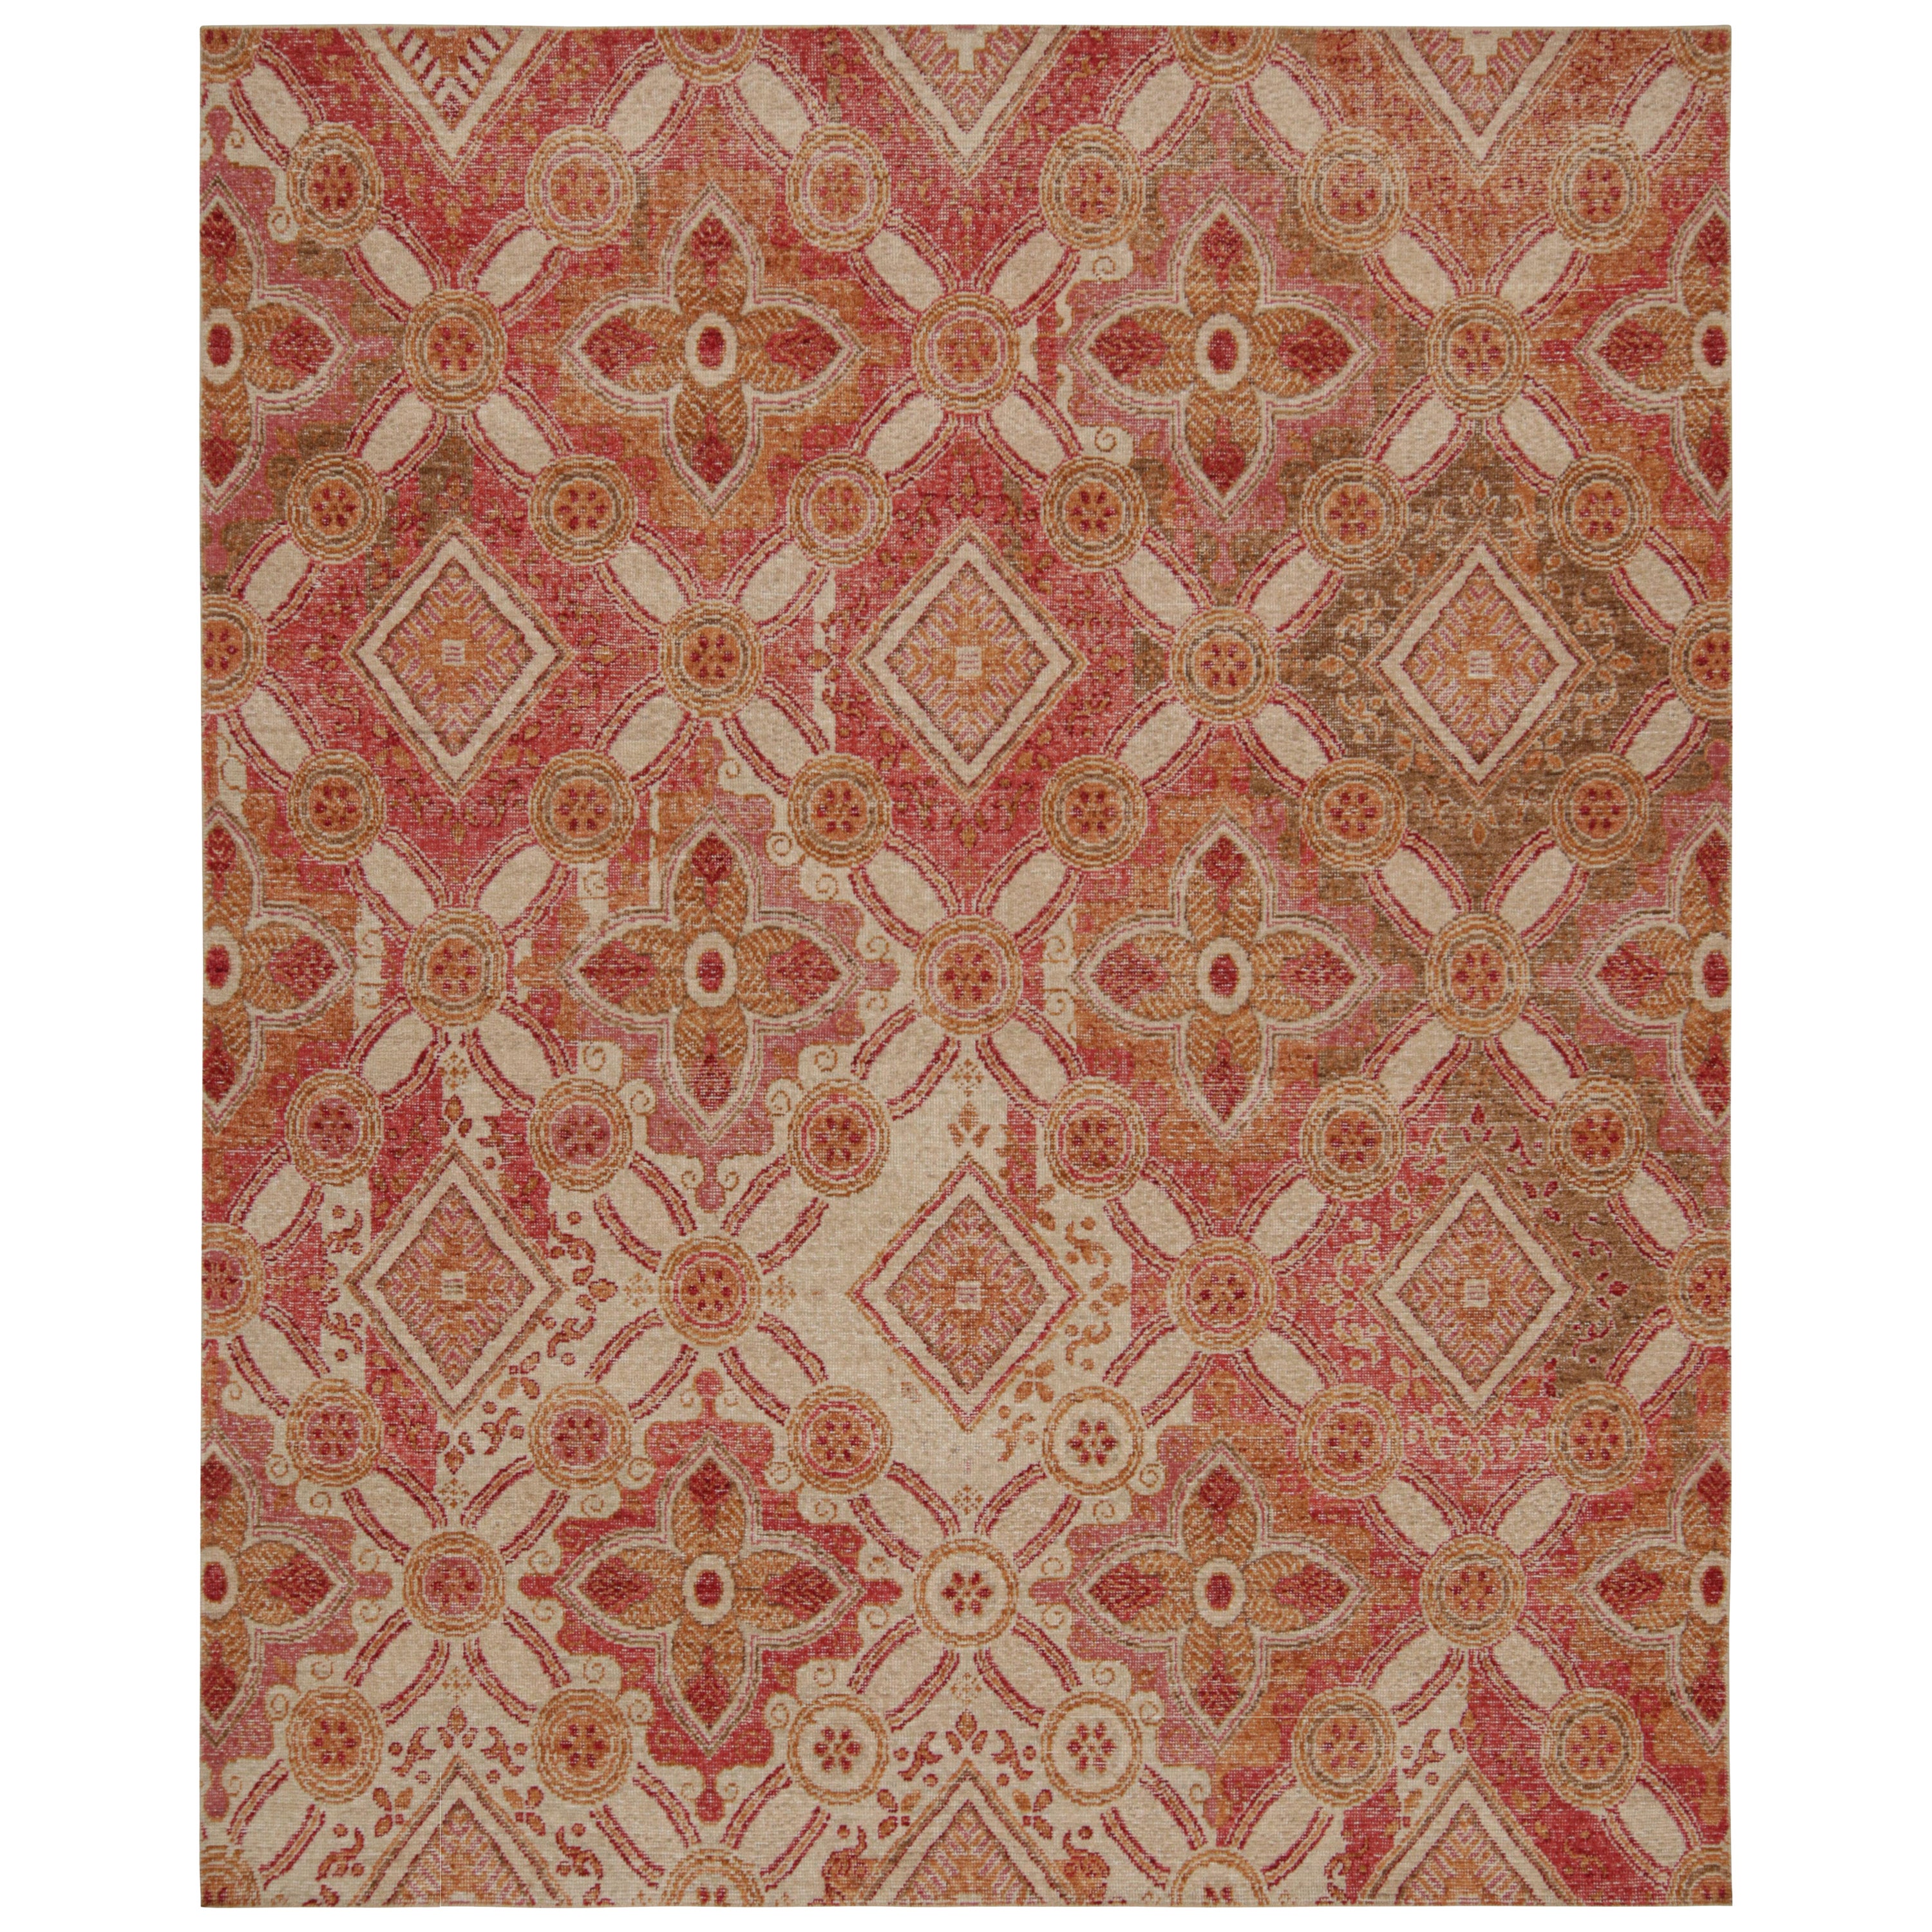 Rug & Kilim’s Distressed Style Rug in Red, Beige and Gold Geometric Patterns For Sale